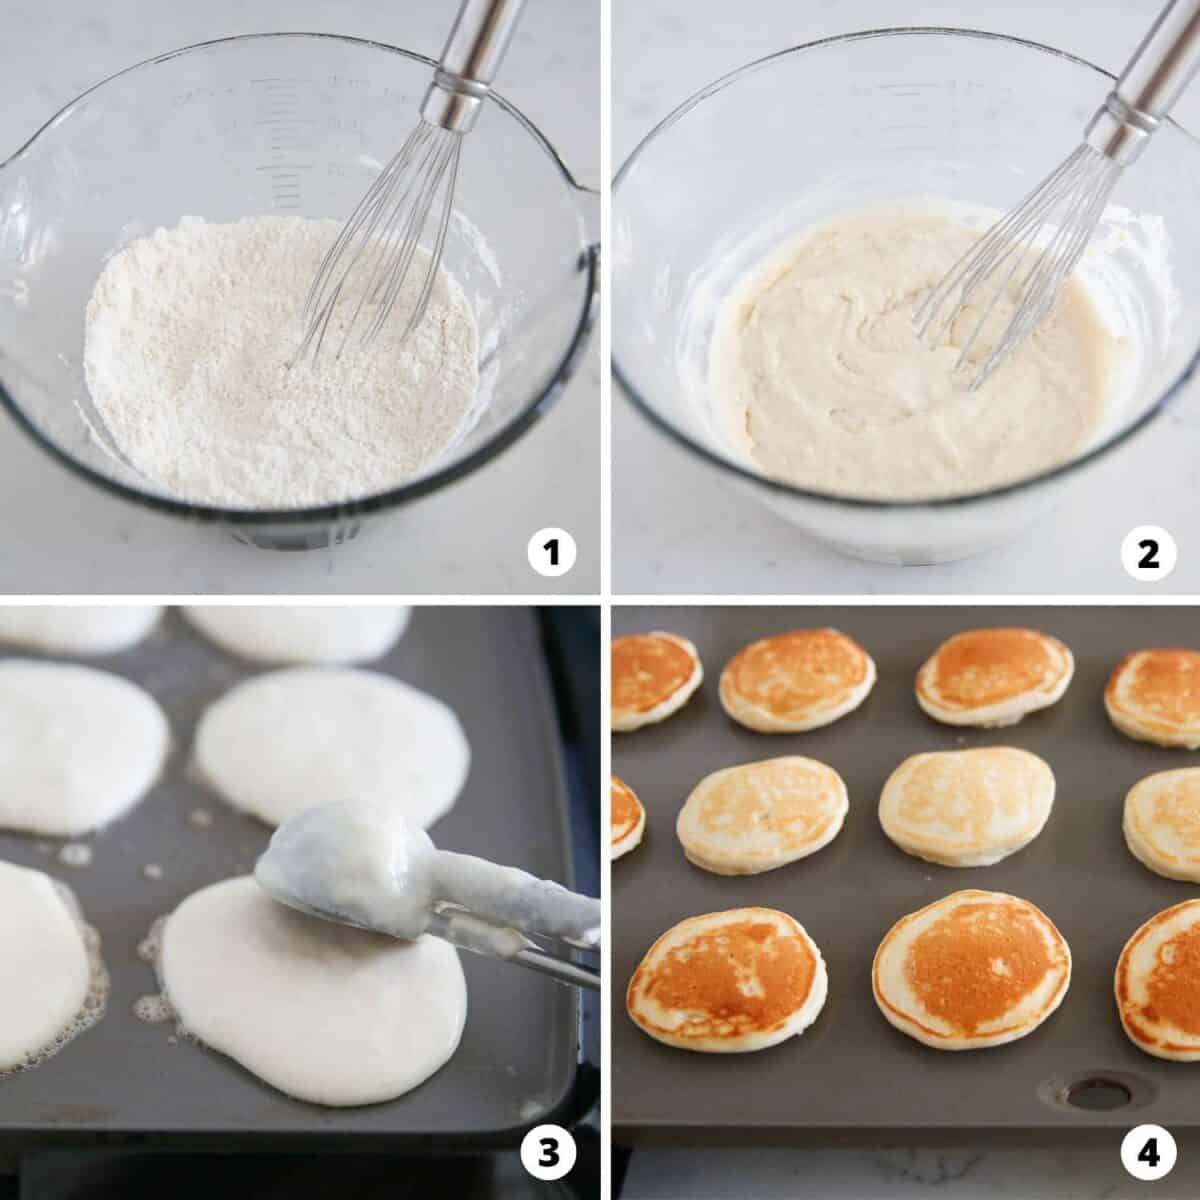 The process of making silver dollar pancakes in a 4 step collage.